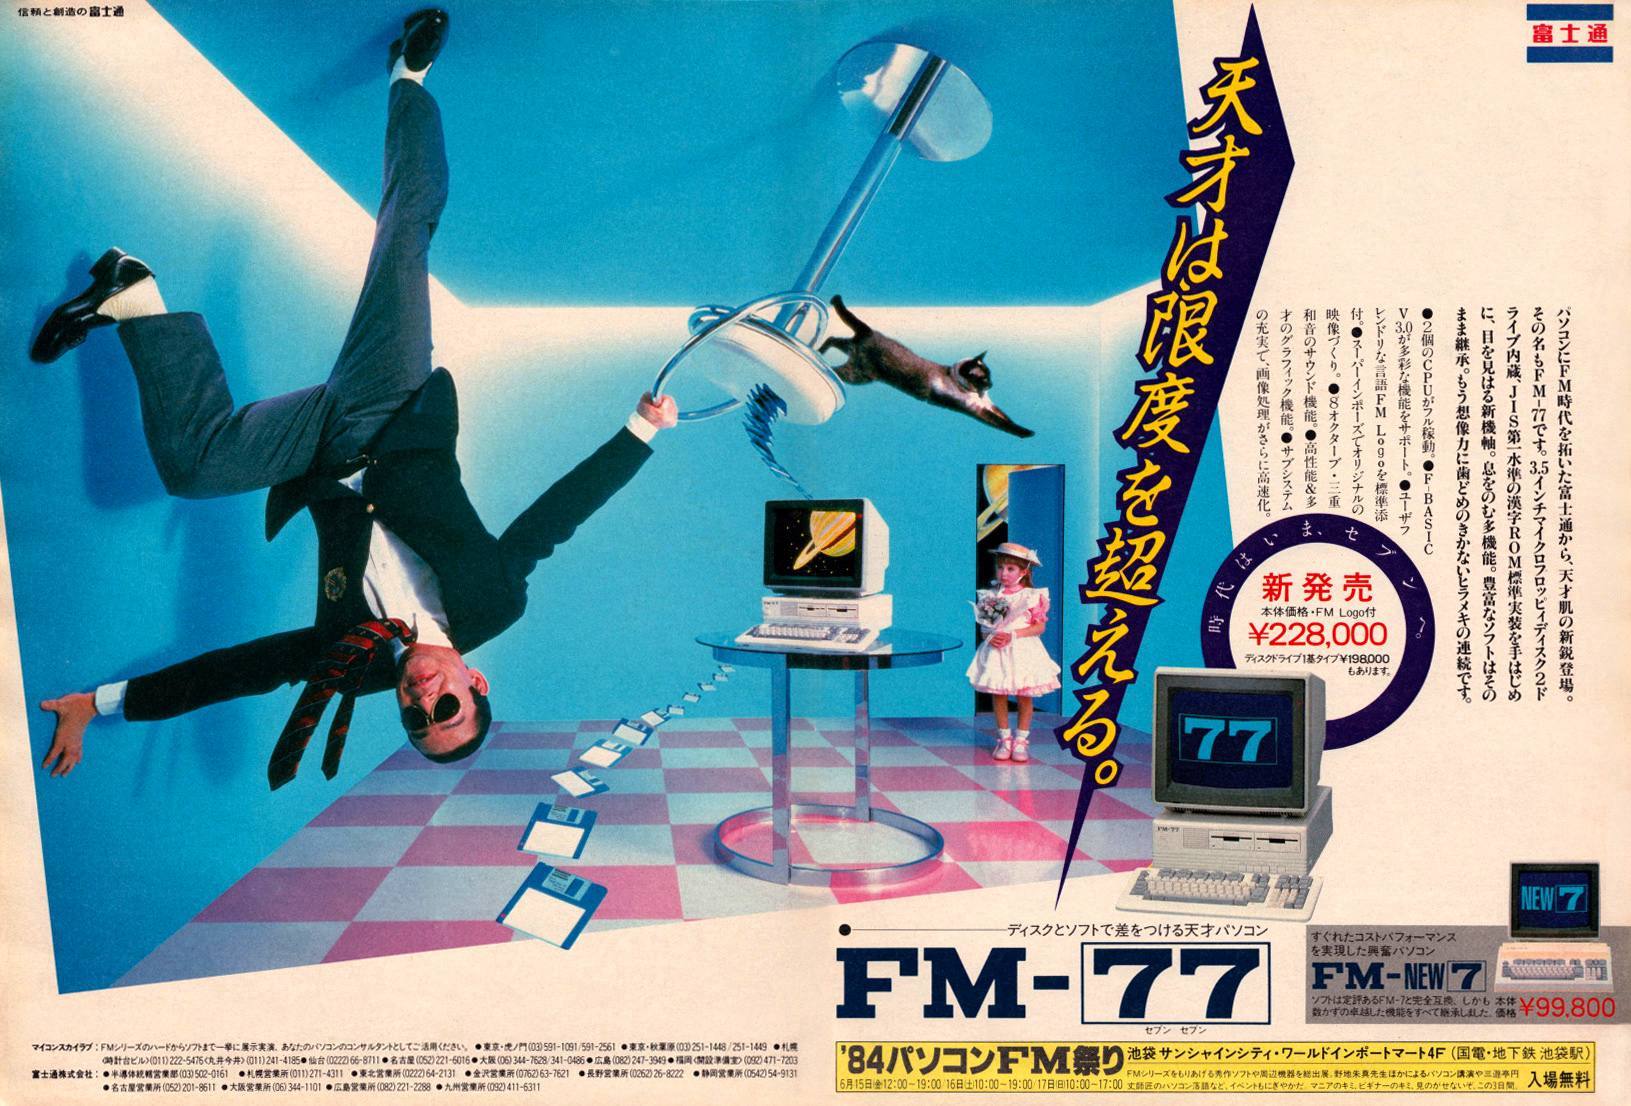 Advertisement For Fujitsu FM-77. Fujitsu, 1984. (This is an advertisement for an old-fashioned computer.)